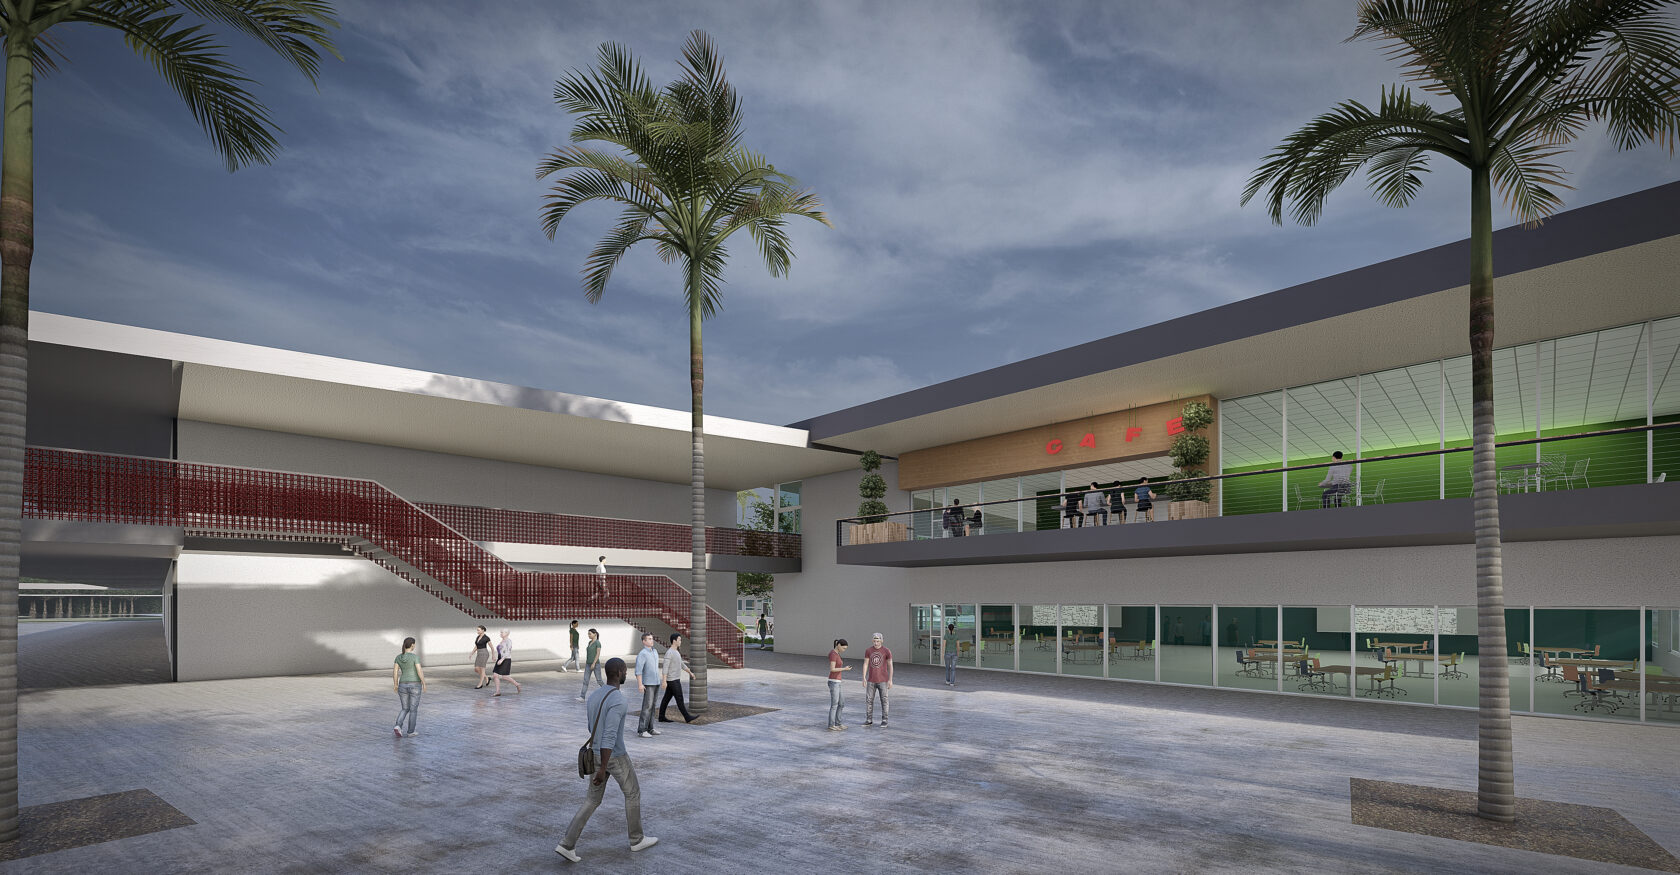 Rendering of proposed cafe design at Clearwater High School